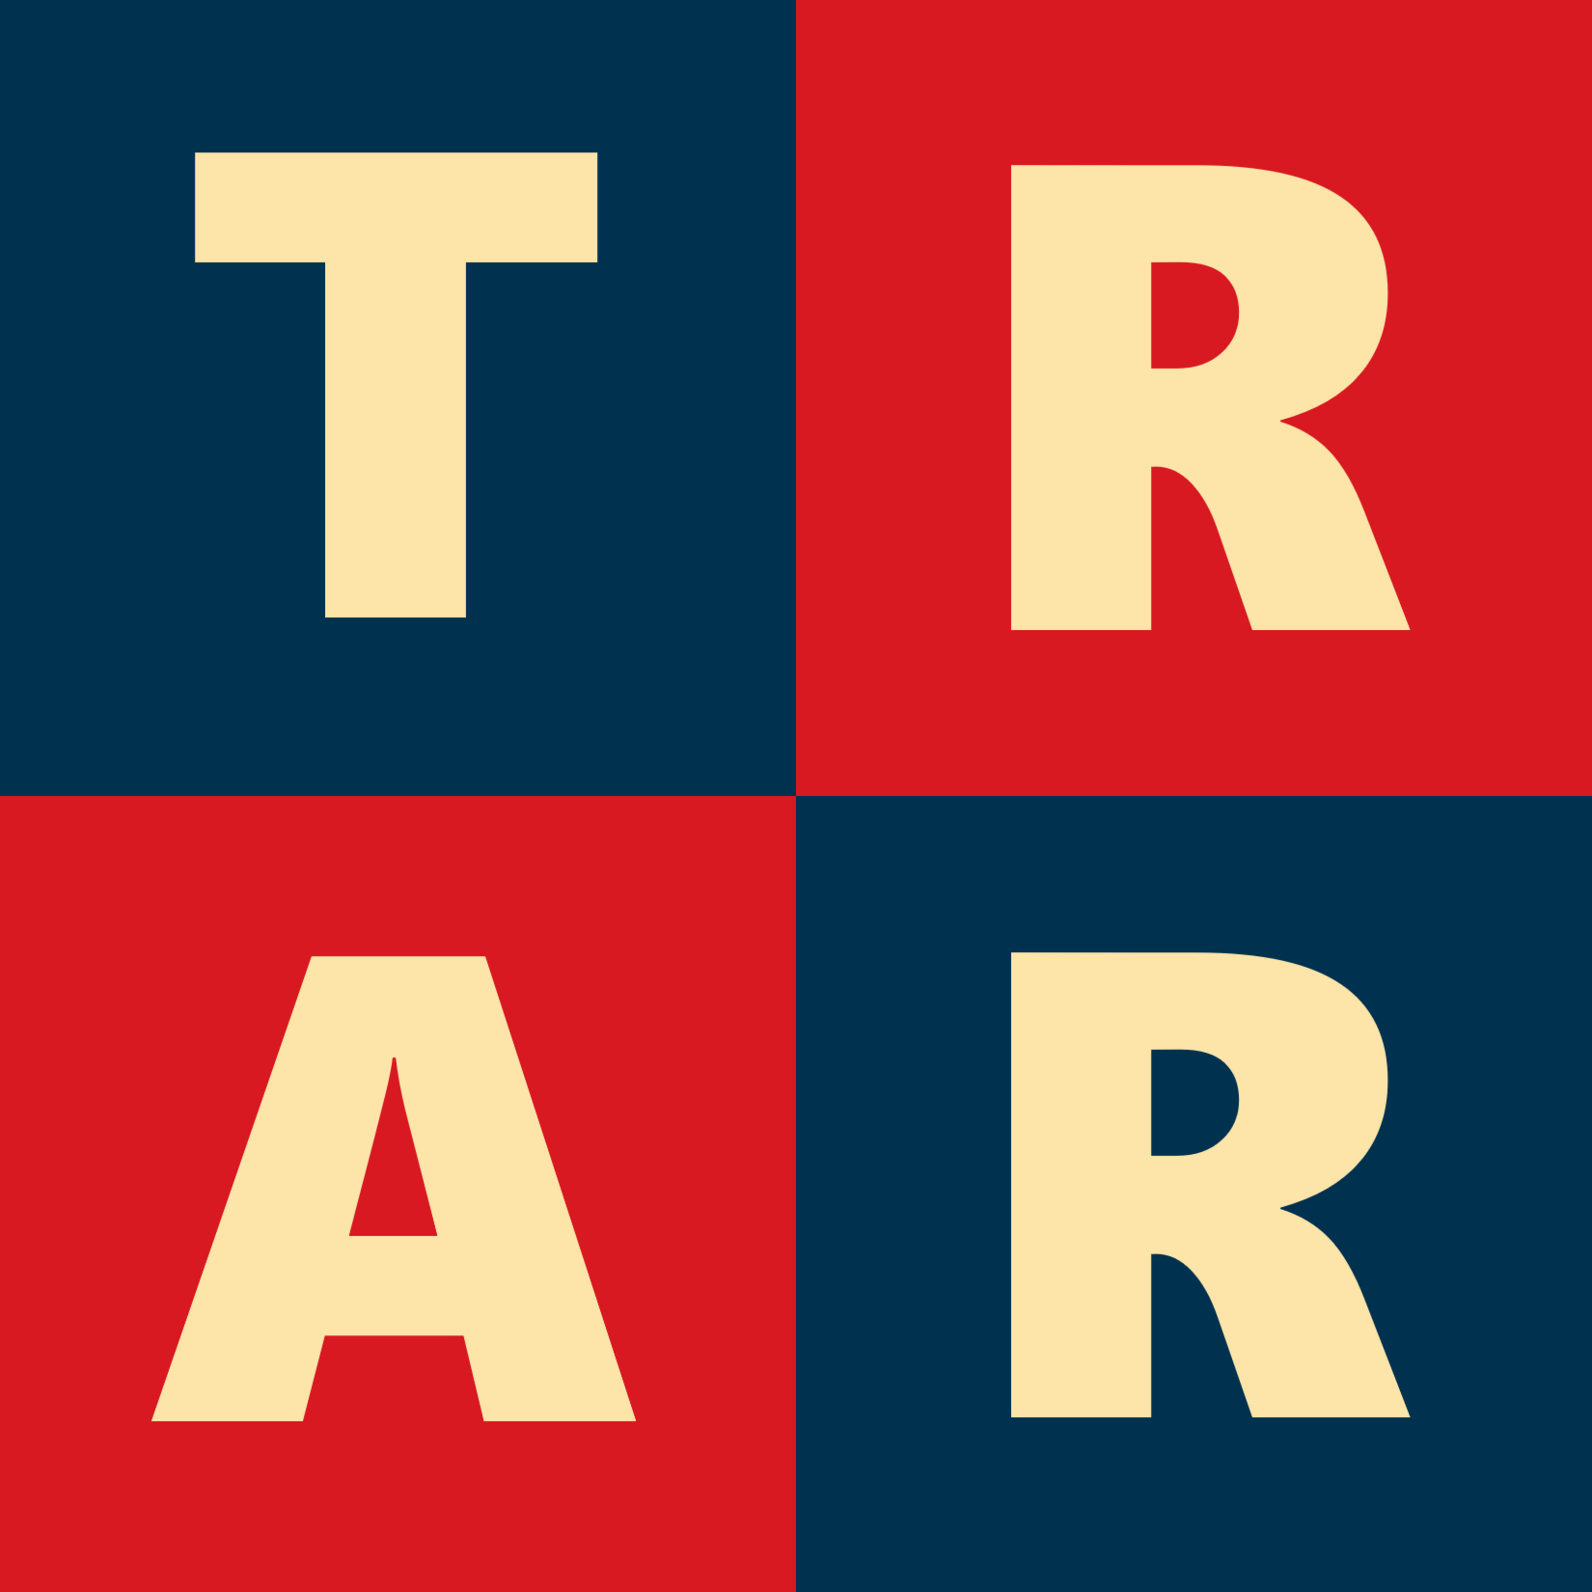 4 blocks of alternating red and dark blue. Each block has one letter, spelling out T R A R.